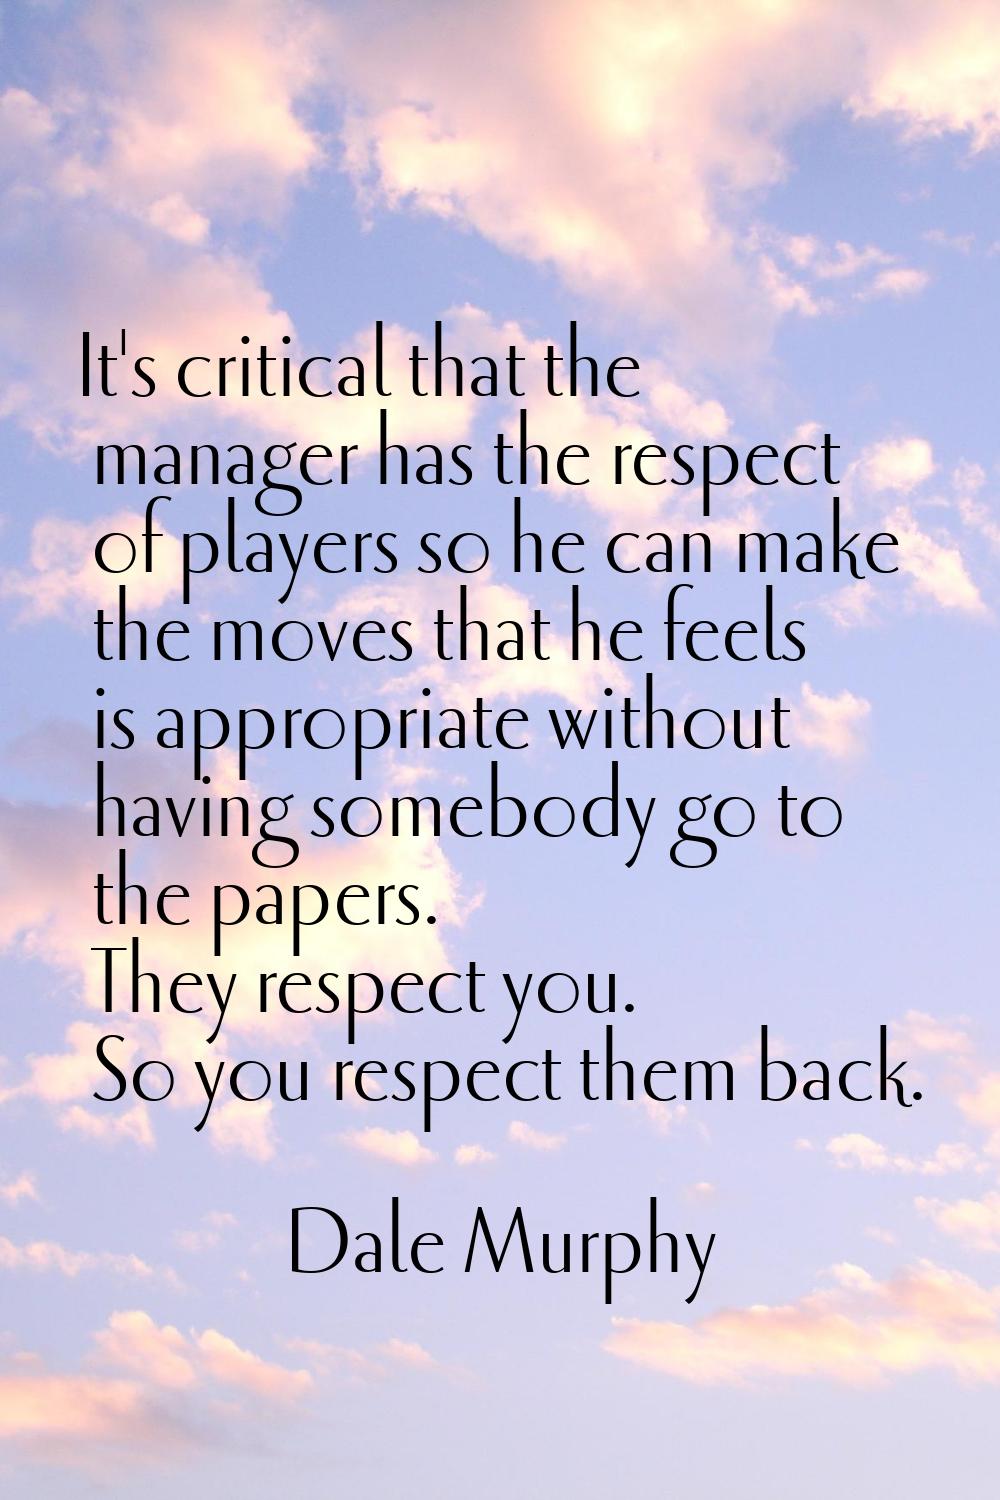 It's critical that the manager has the respect of players so he can make the moves that he feels is